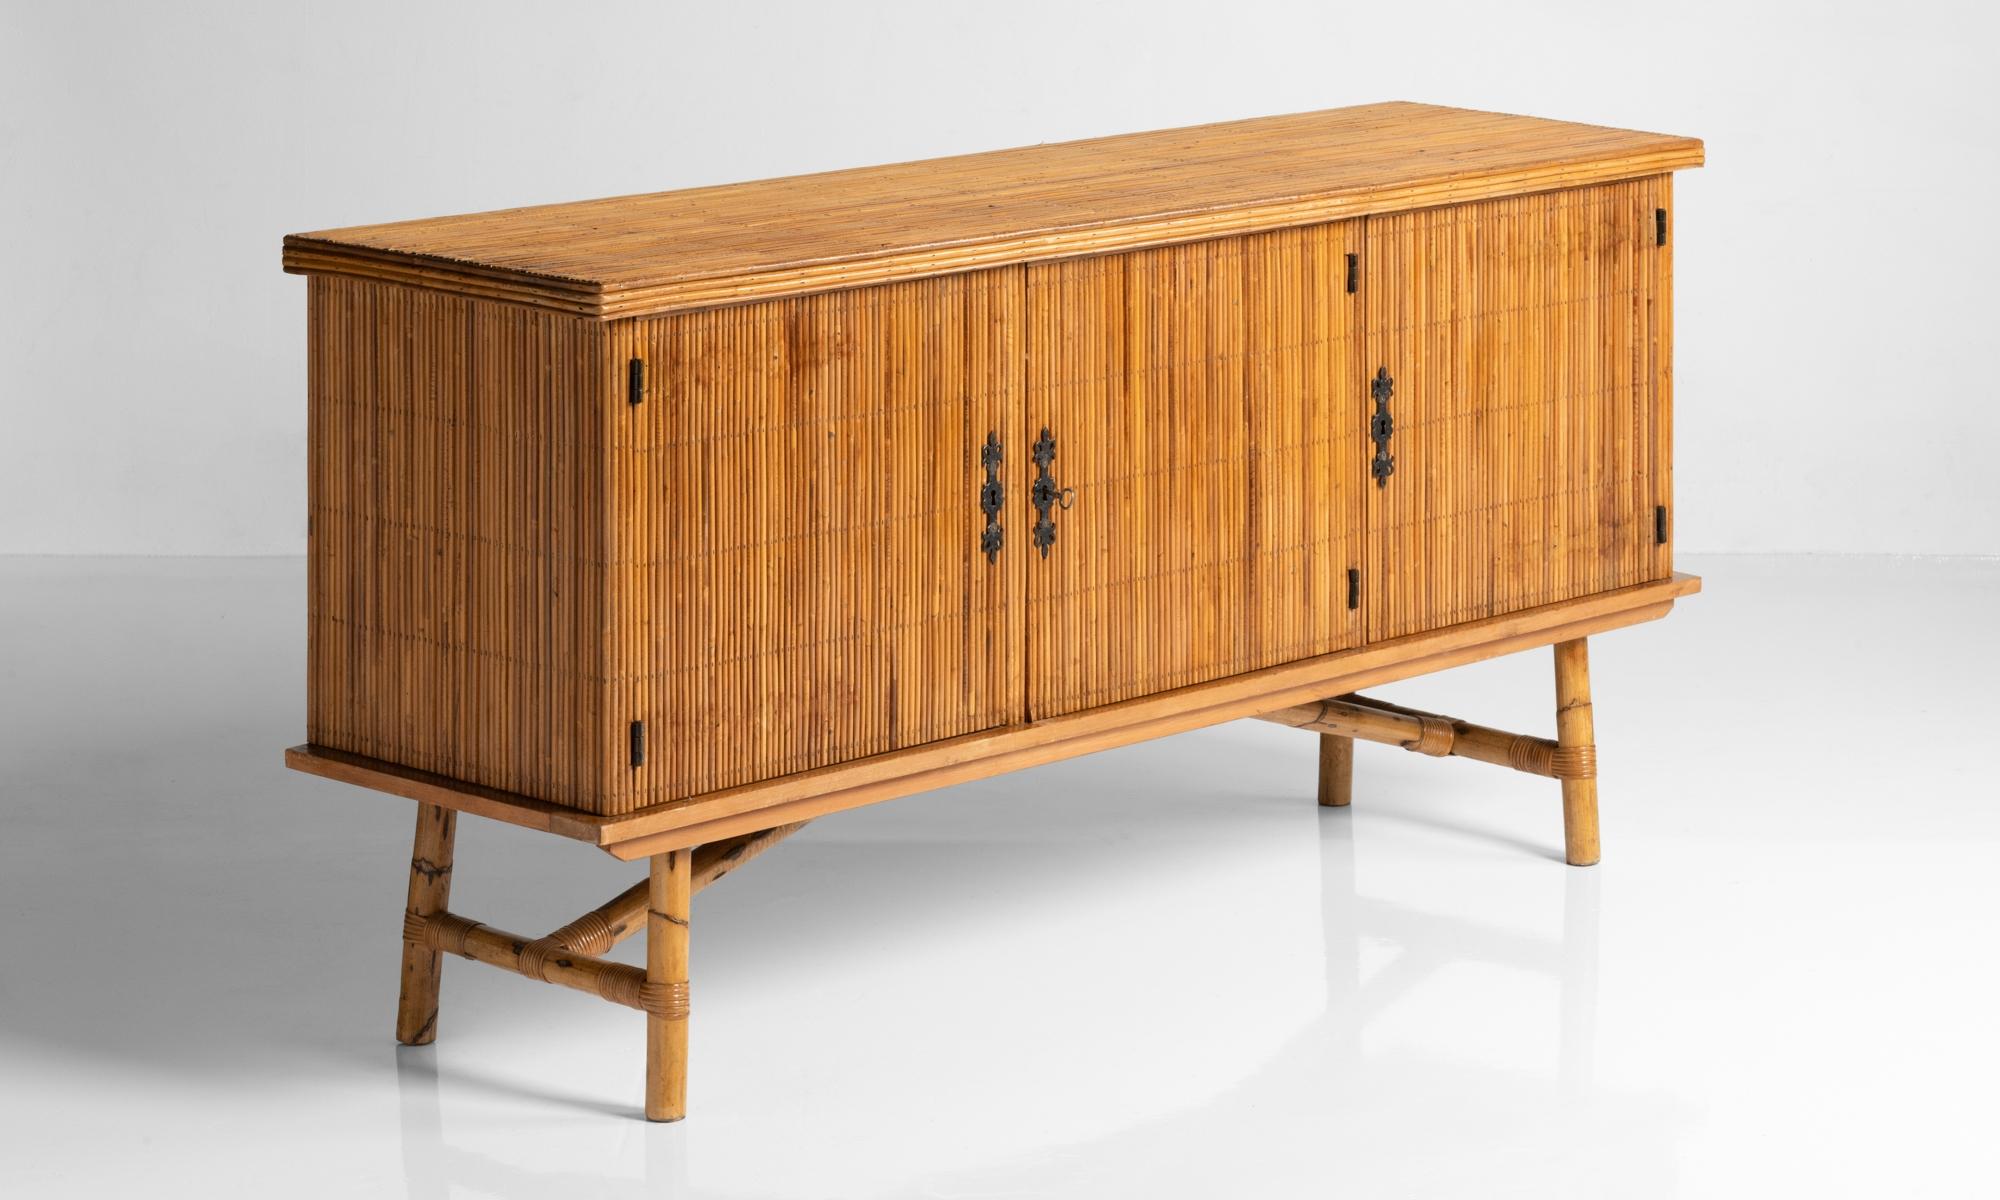 Bamboo sideboard, France, circa 1940

Unique form with bamboo paneling throughout.